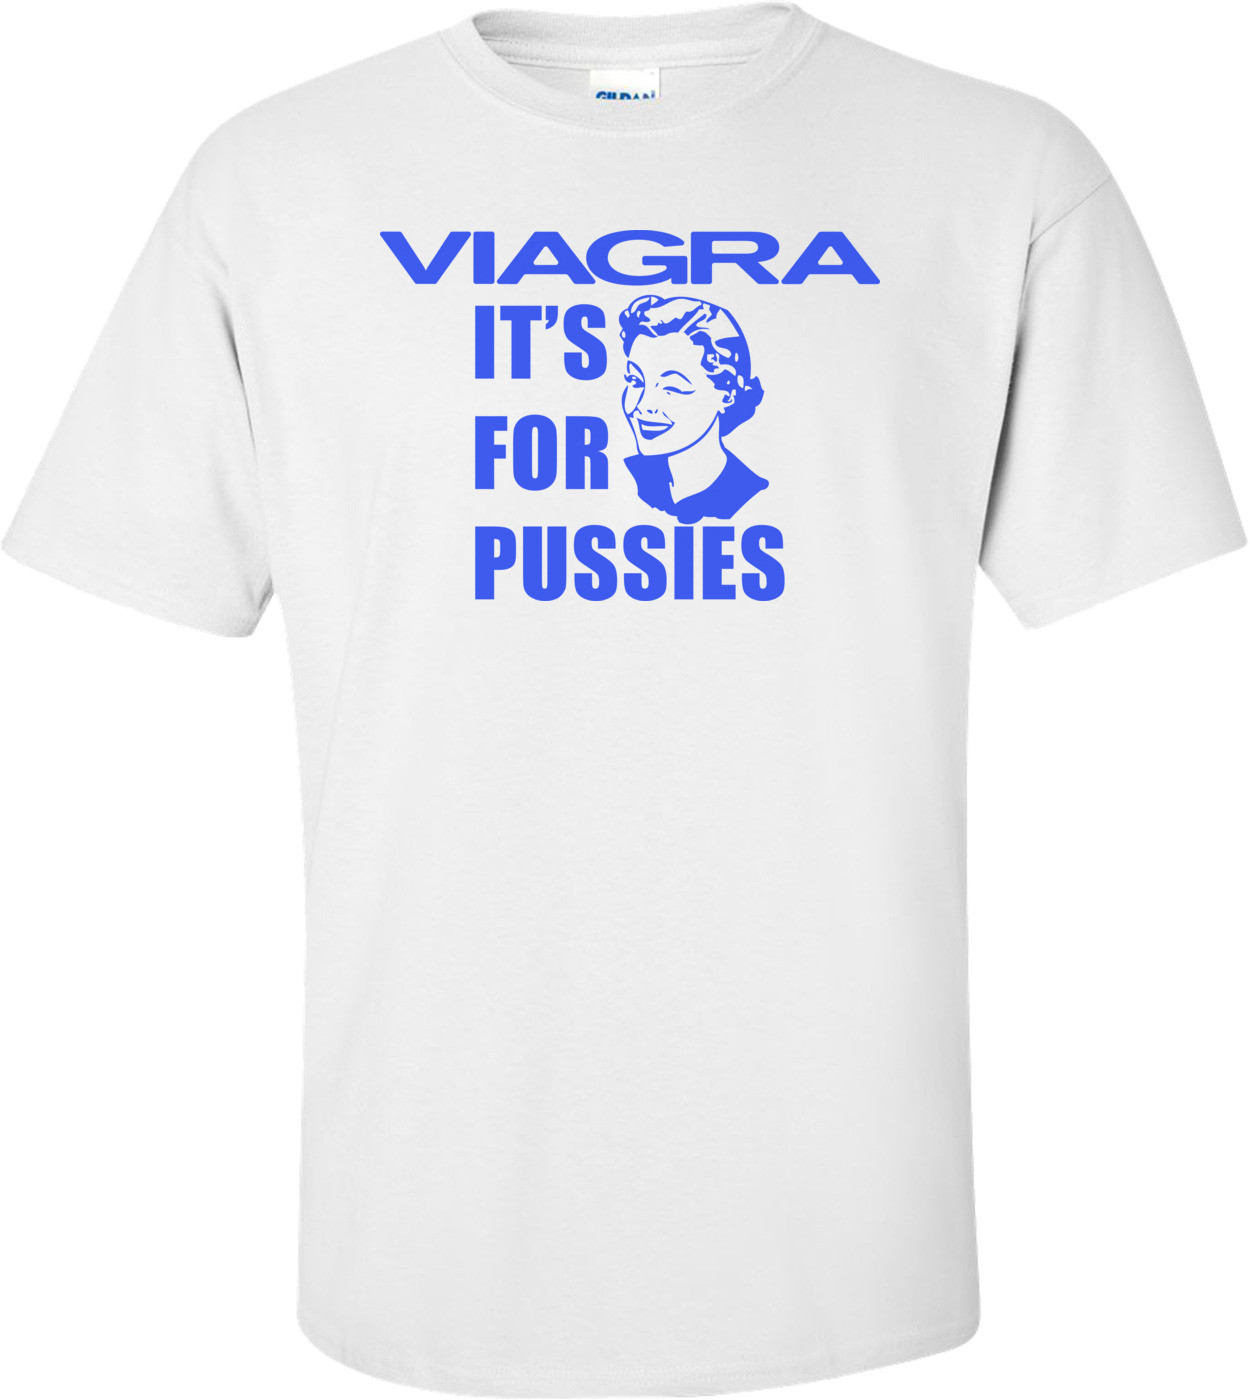 Viagra Its For Pussies Funny